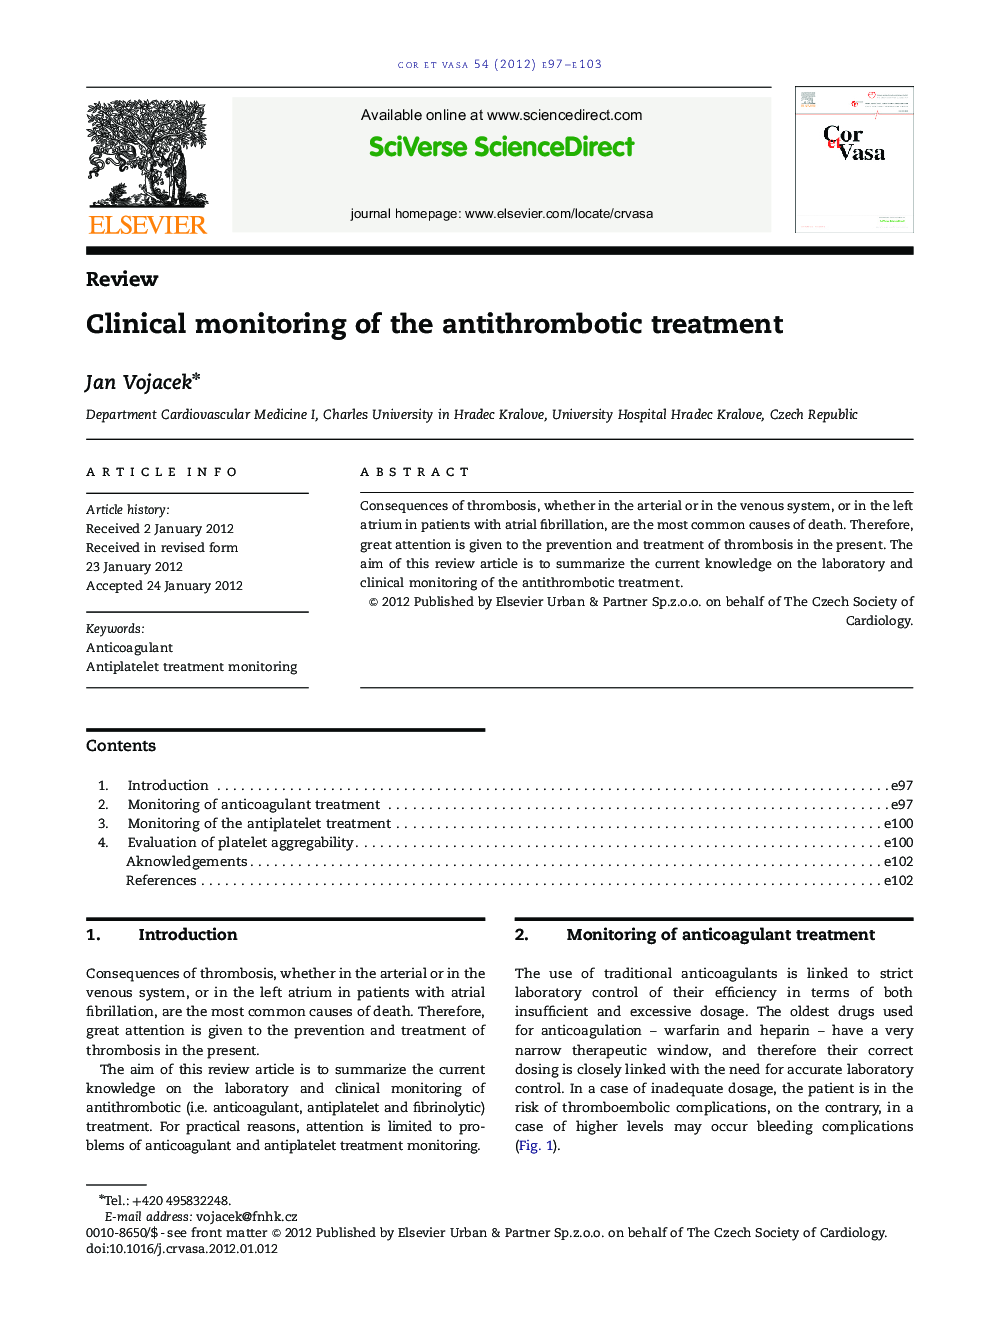 Clinical monitoring of the antithrombotic treatment